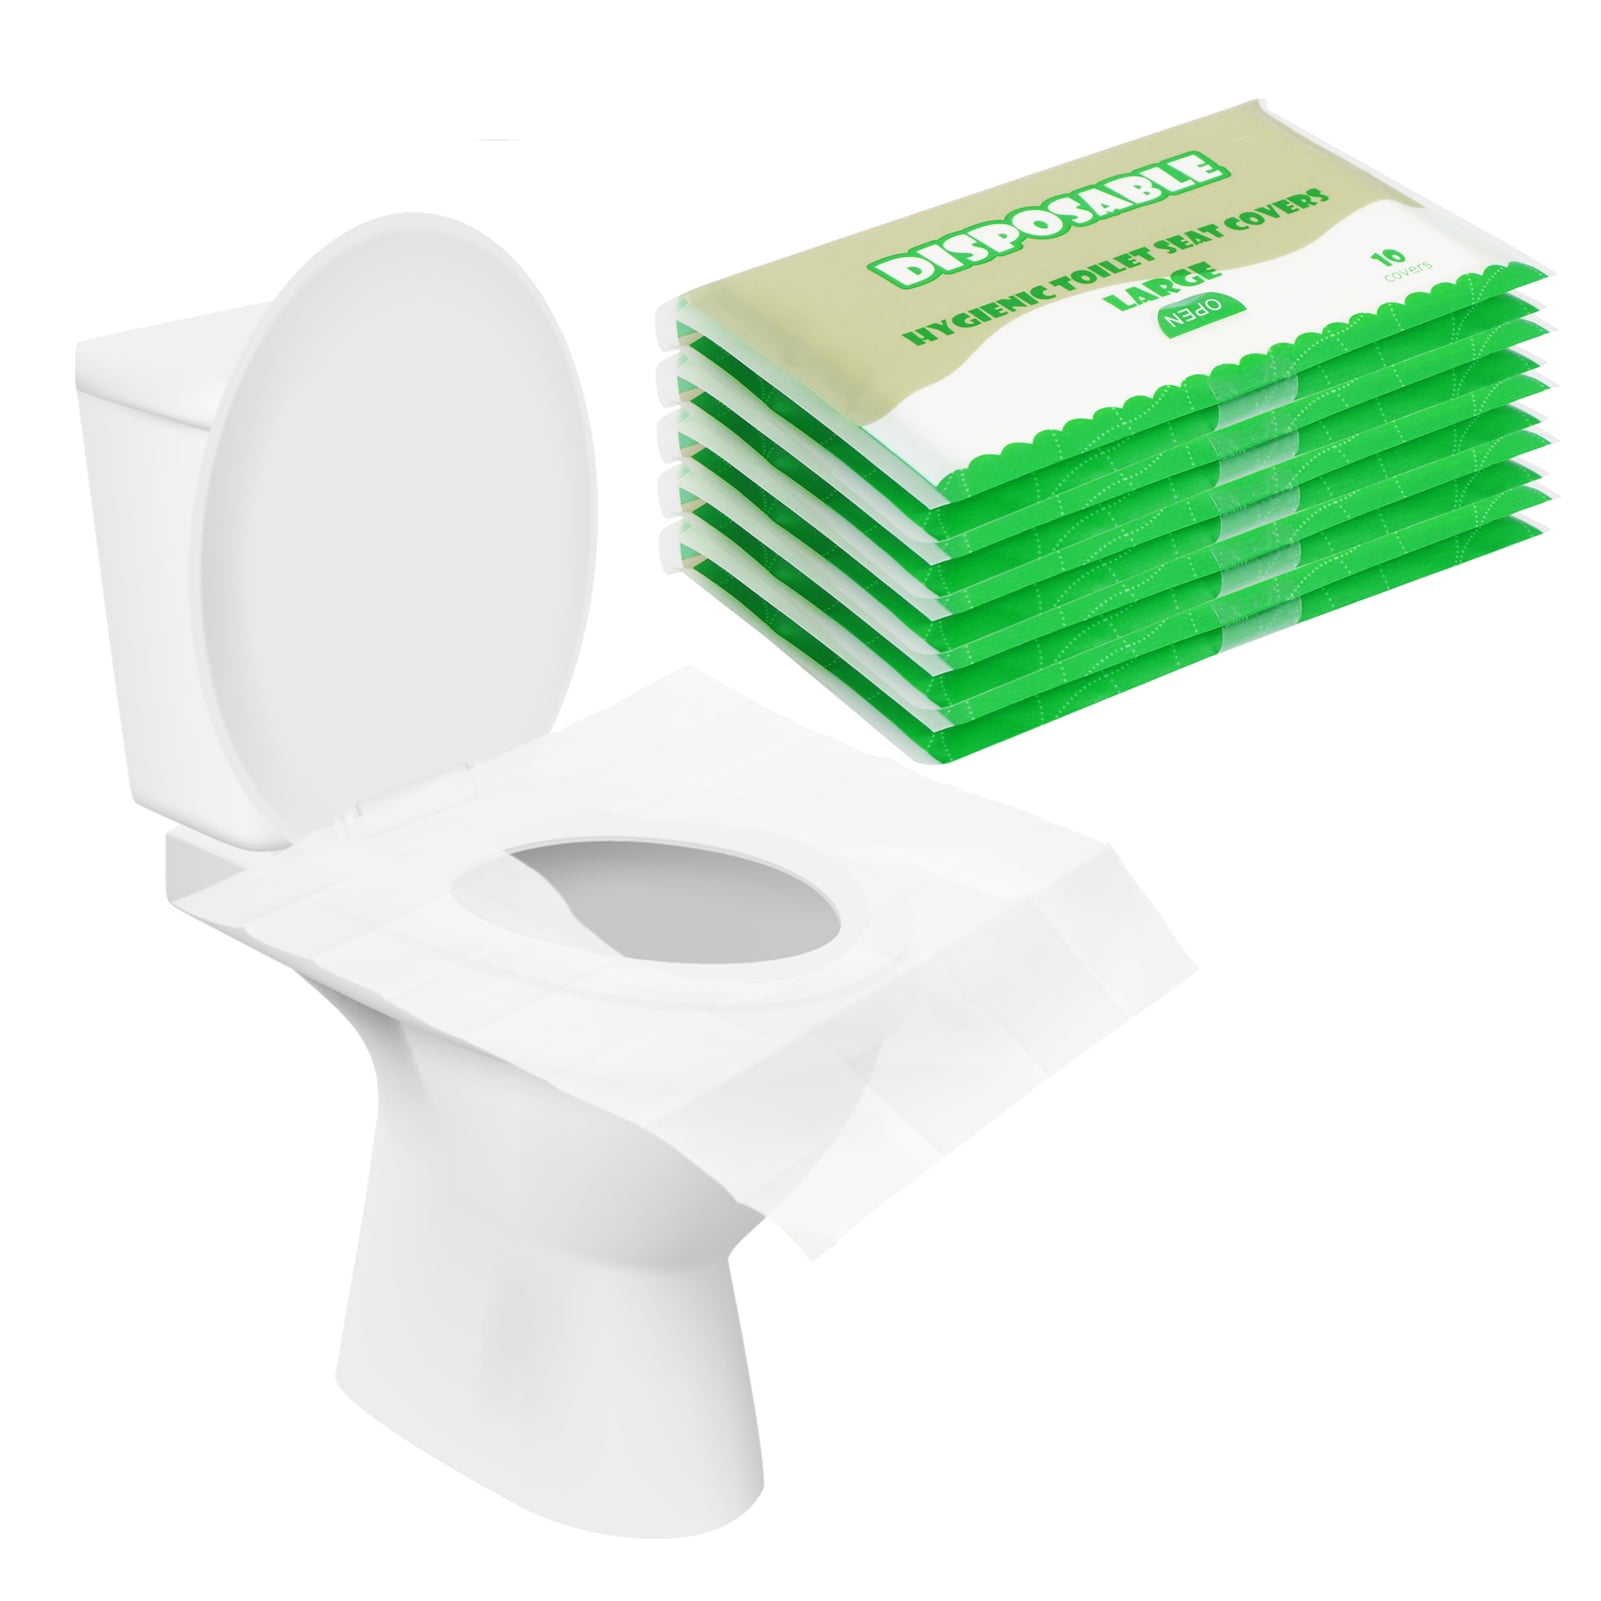 50 Pack Camping - XL Flushable Paper Toilet Seat Covers for Adults and Kids Potty Training Travel Accessories for Public Restrooms 100% Biodegradable Toilet Seat Covers Paper Flushable Airplane 